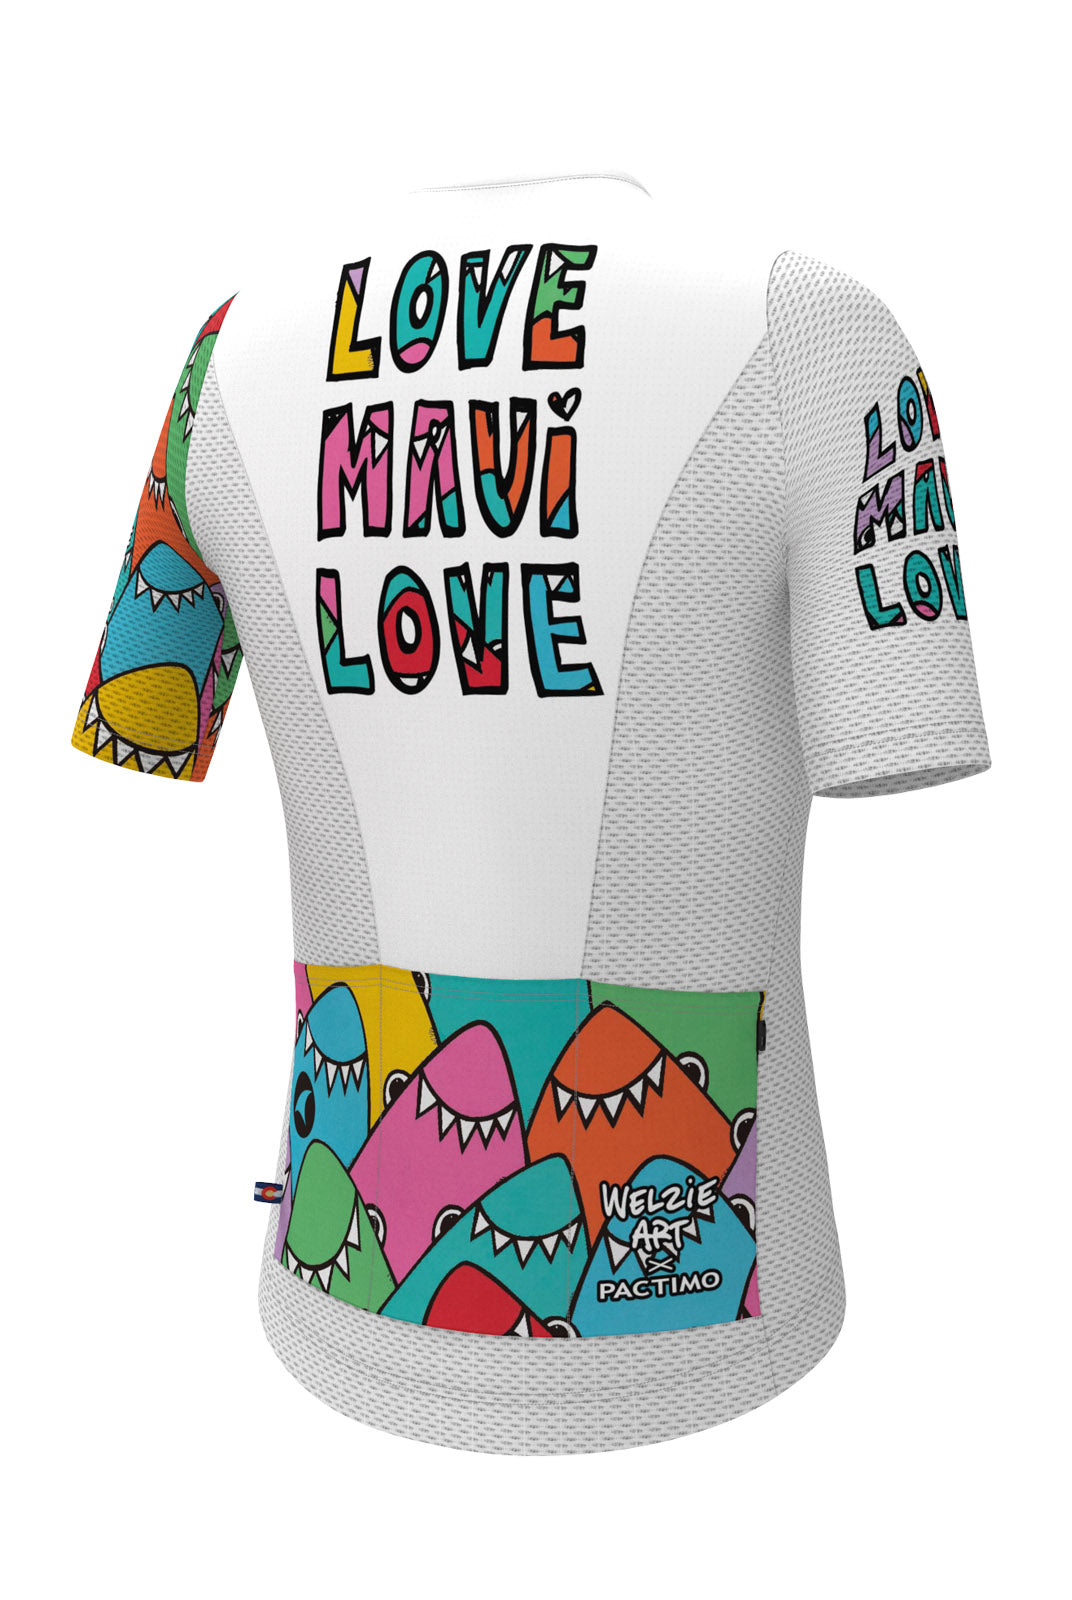 Women's Summer Cycling Jersey - White Welzie Design - Back View #color_love-maui-love-white